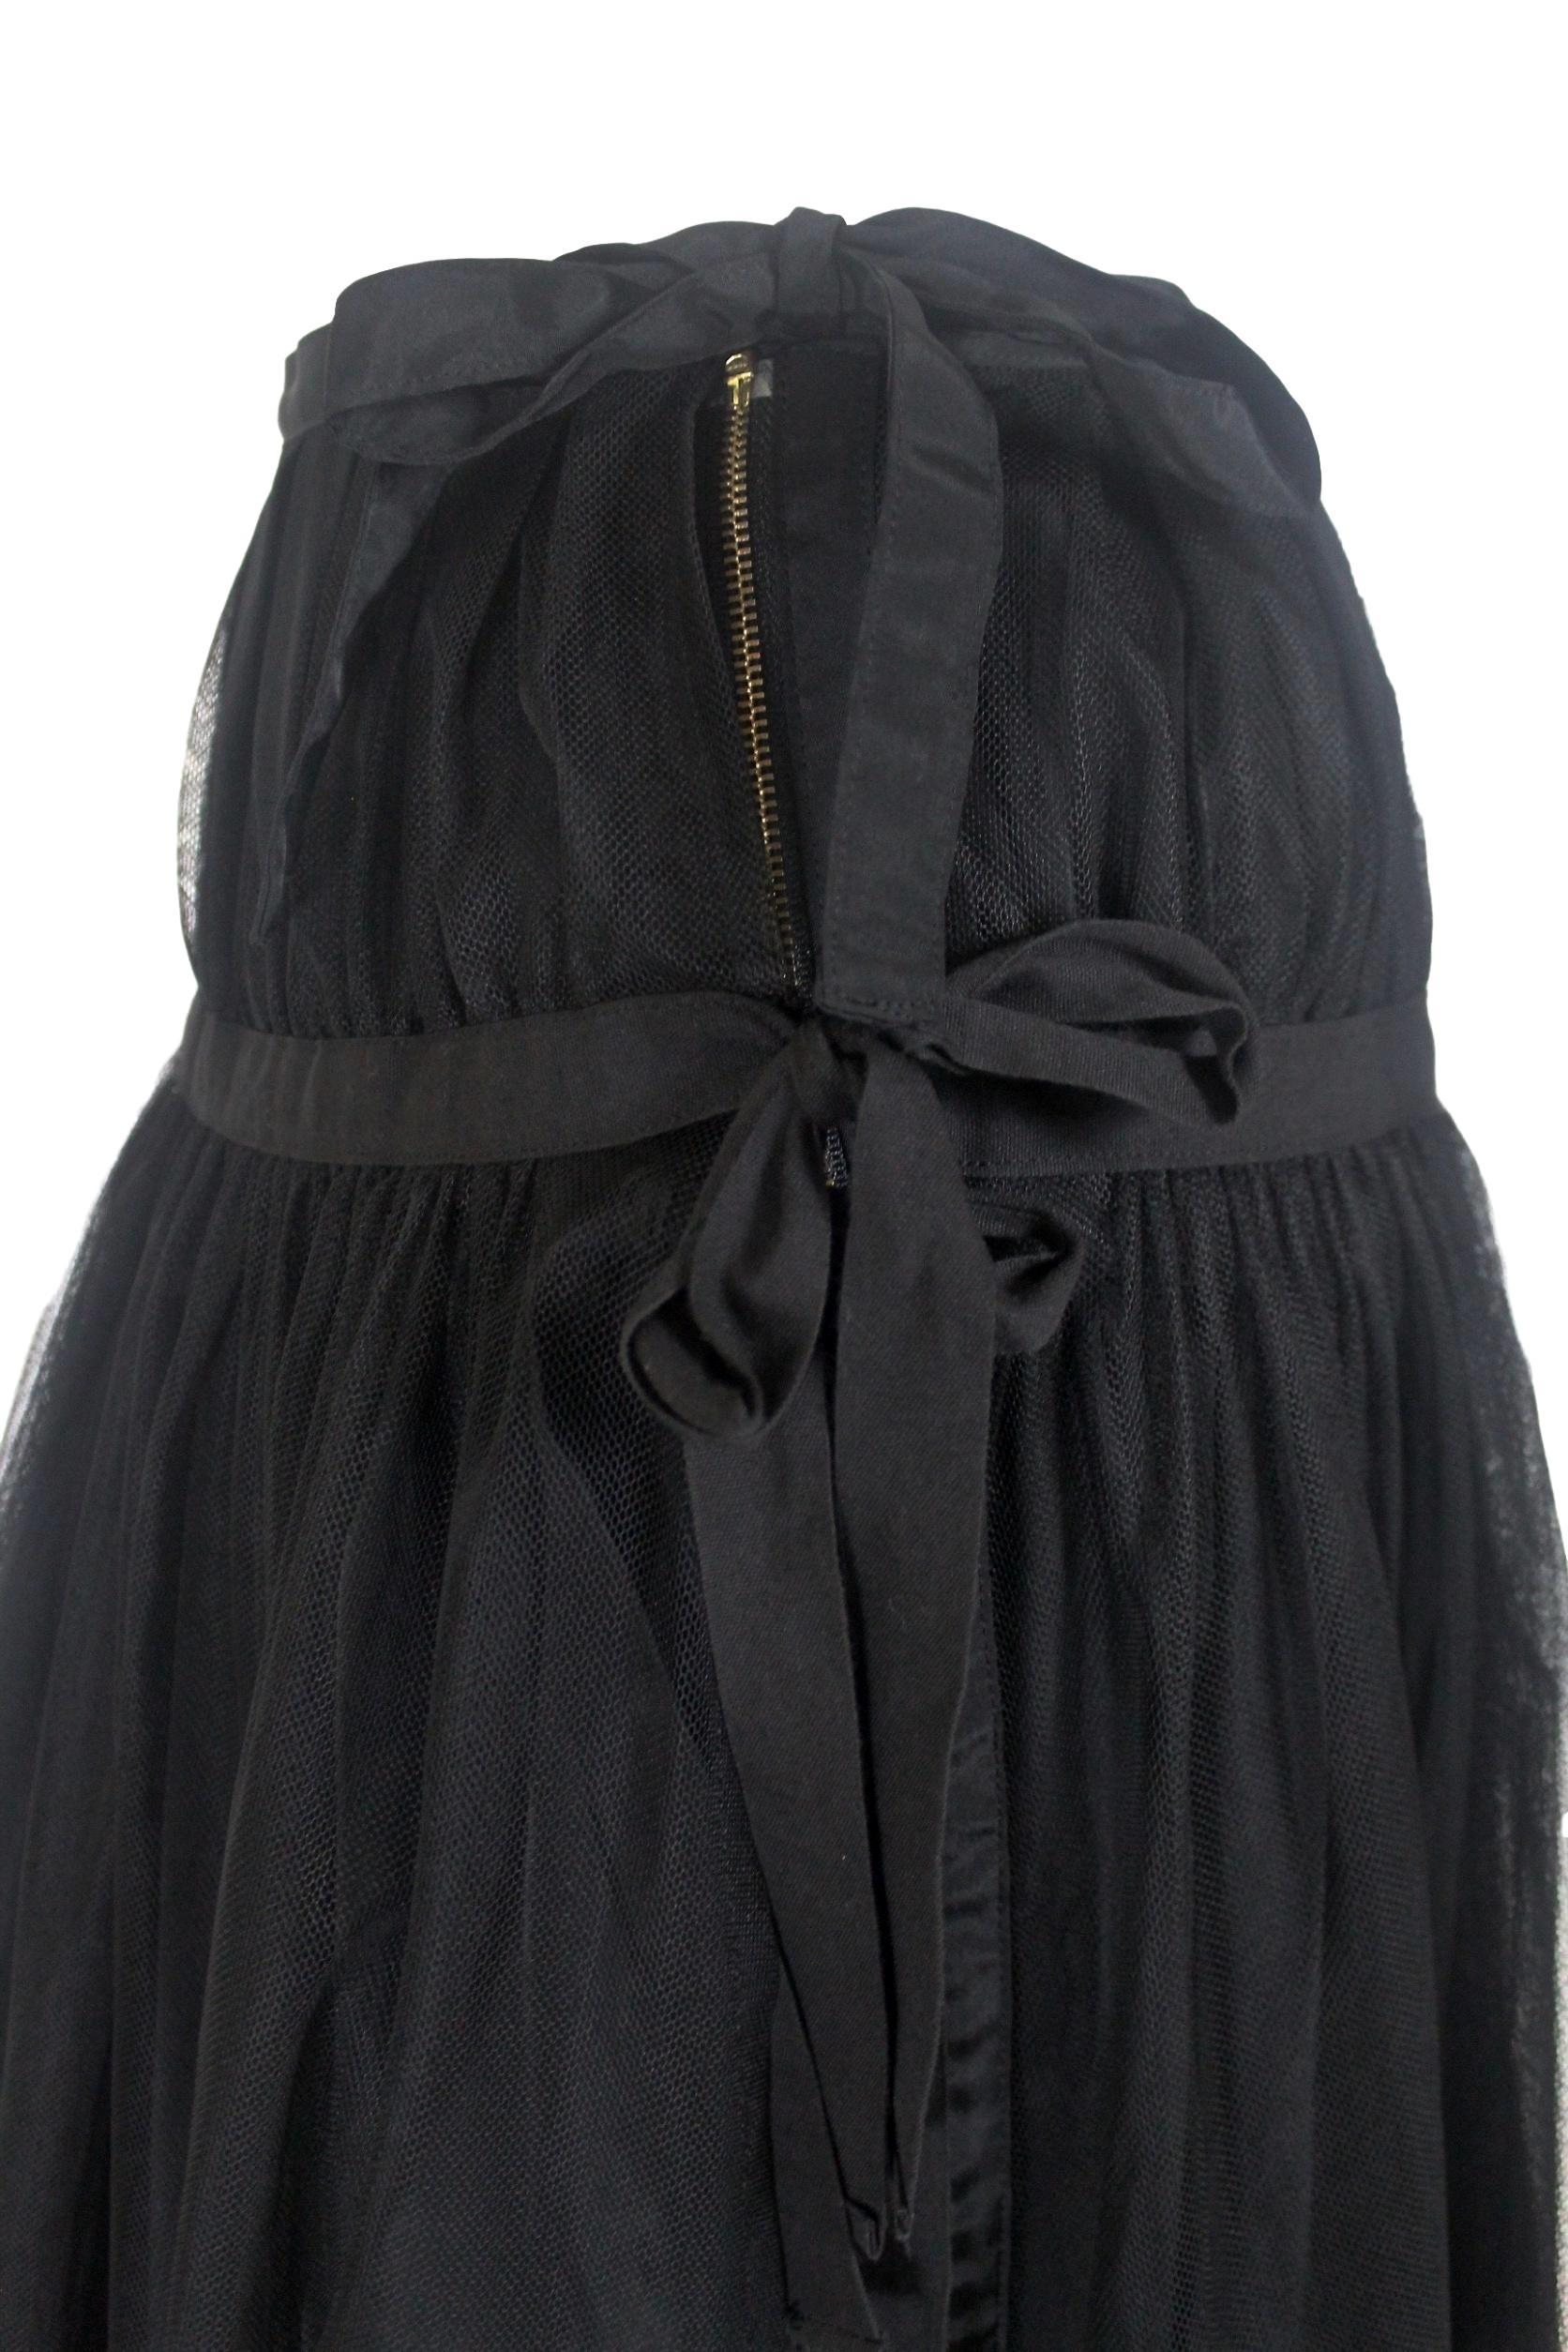 Comme des Garcons Tricot Double Layer Wrap Skirt 2007 In Excellent Condition For Sale In Bath, GB